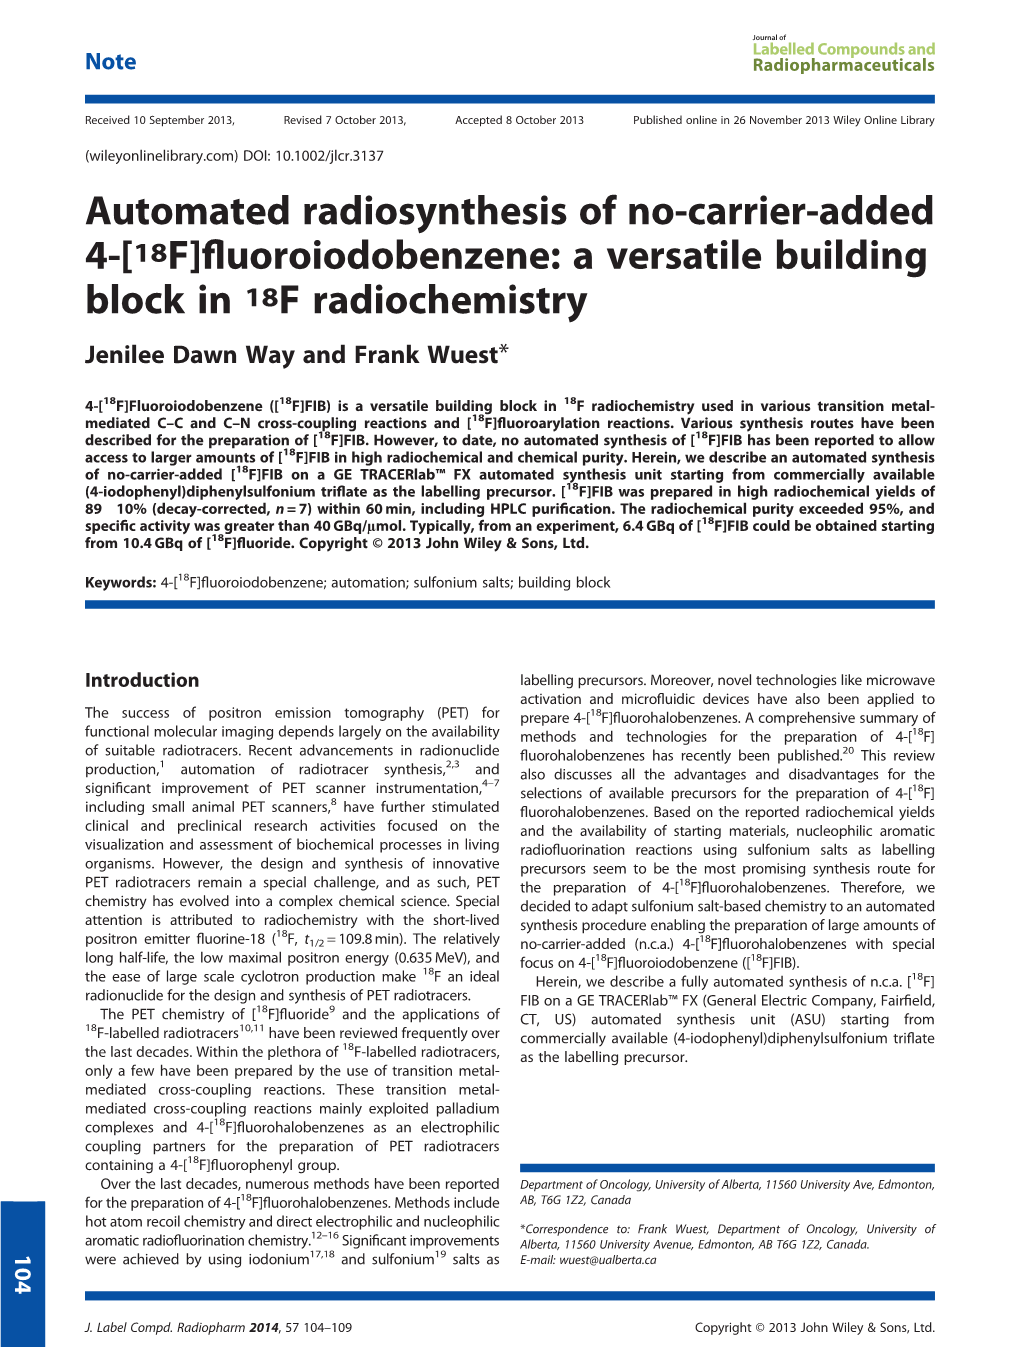 Automated Radiosynthesis of Nocarrieradded 4[18F]Fluoroiodobenzene: a Versatile Building Block in 18F Radiochemistry